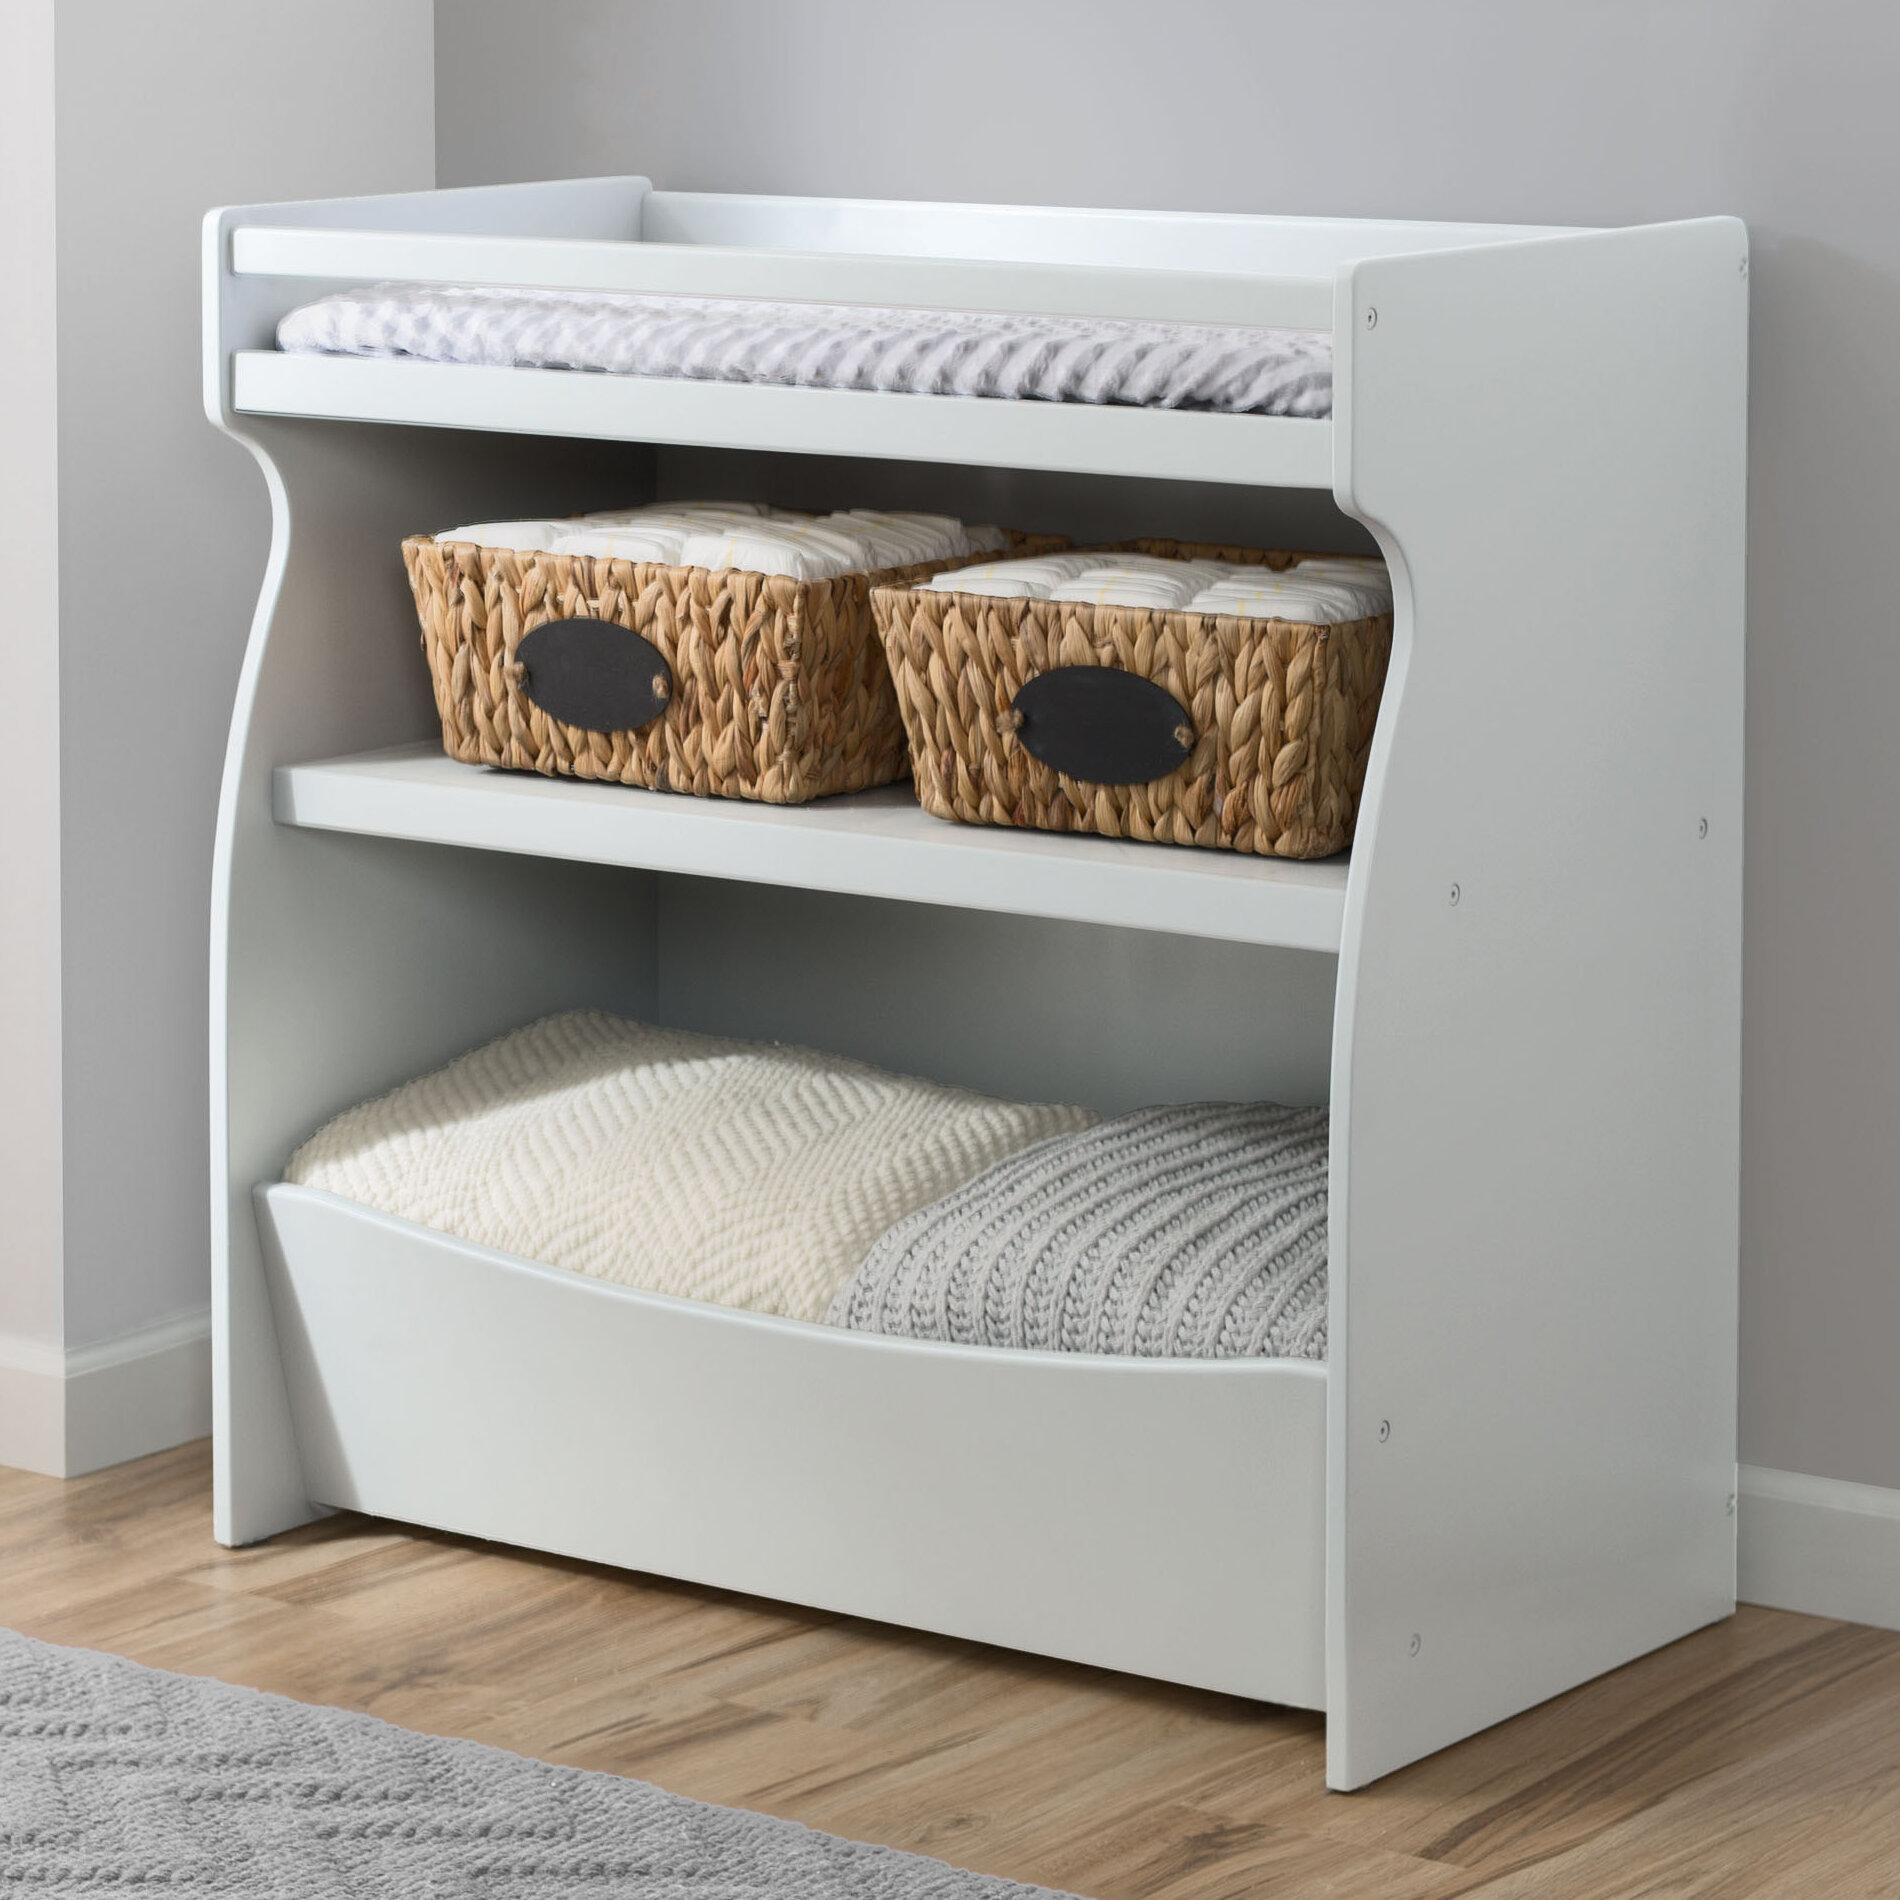 delta changing table with drawer